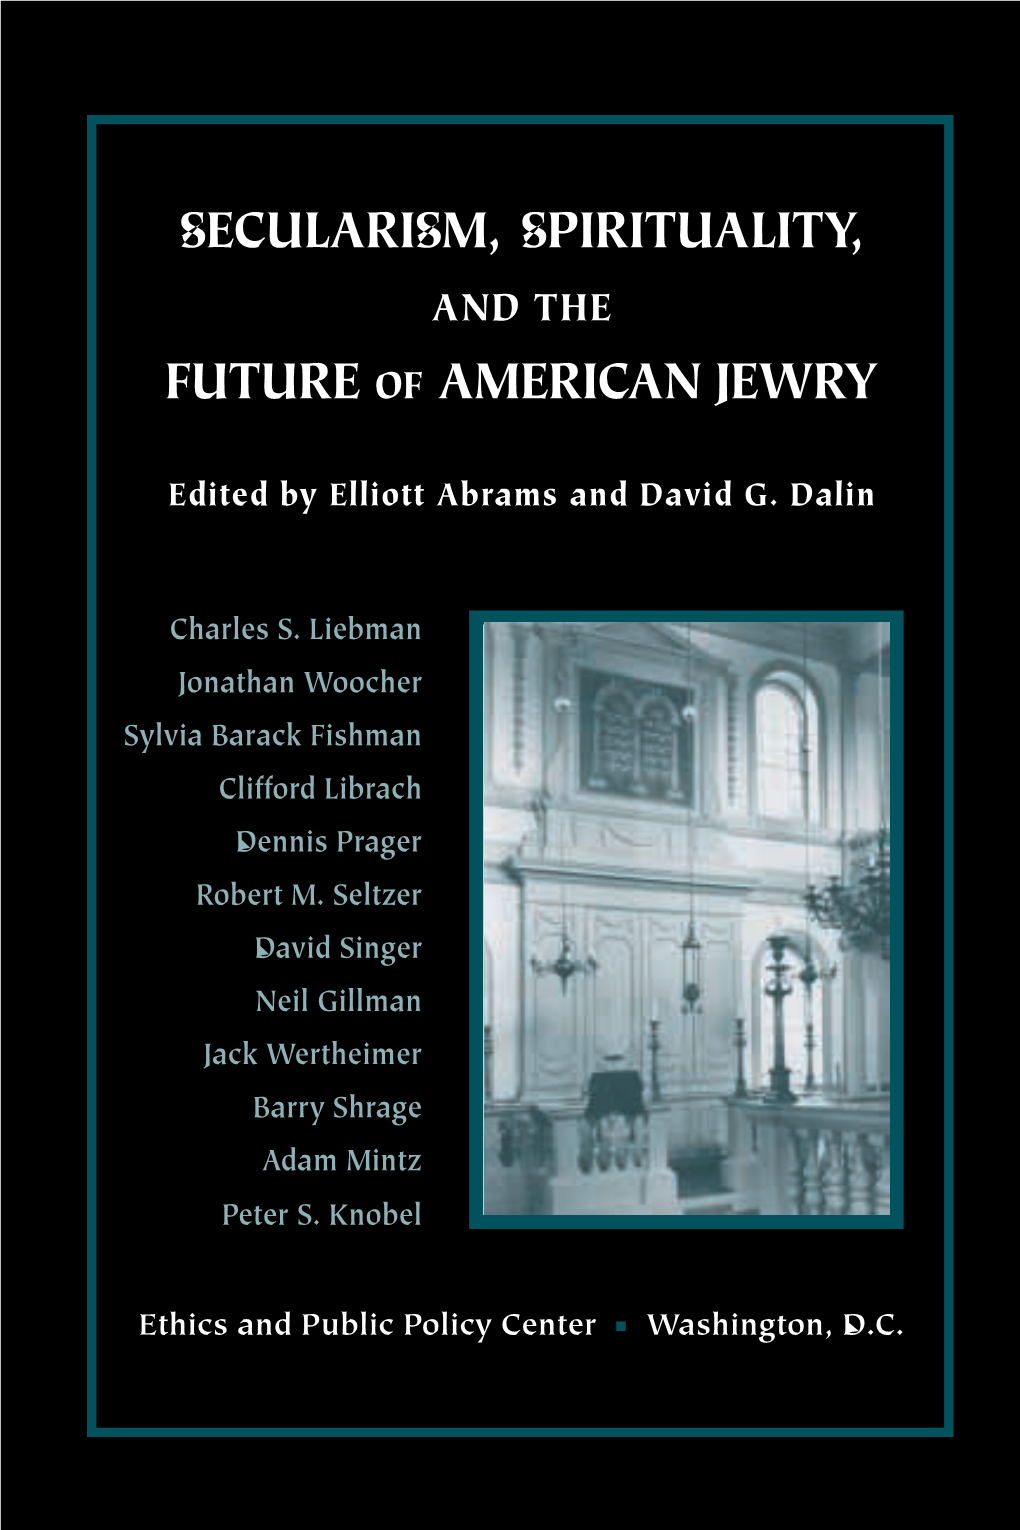 Secularism, Spirituality, and the Future of American Jewry